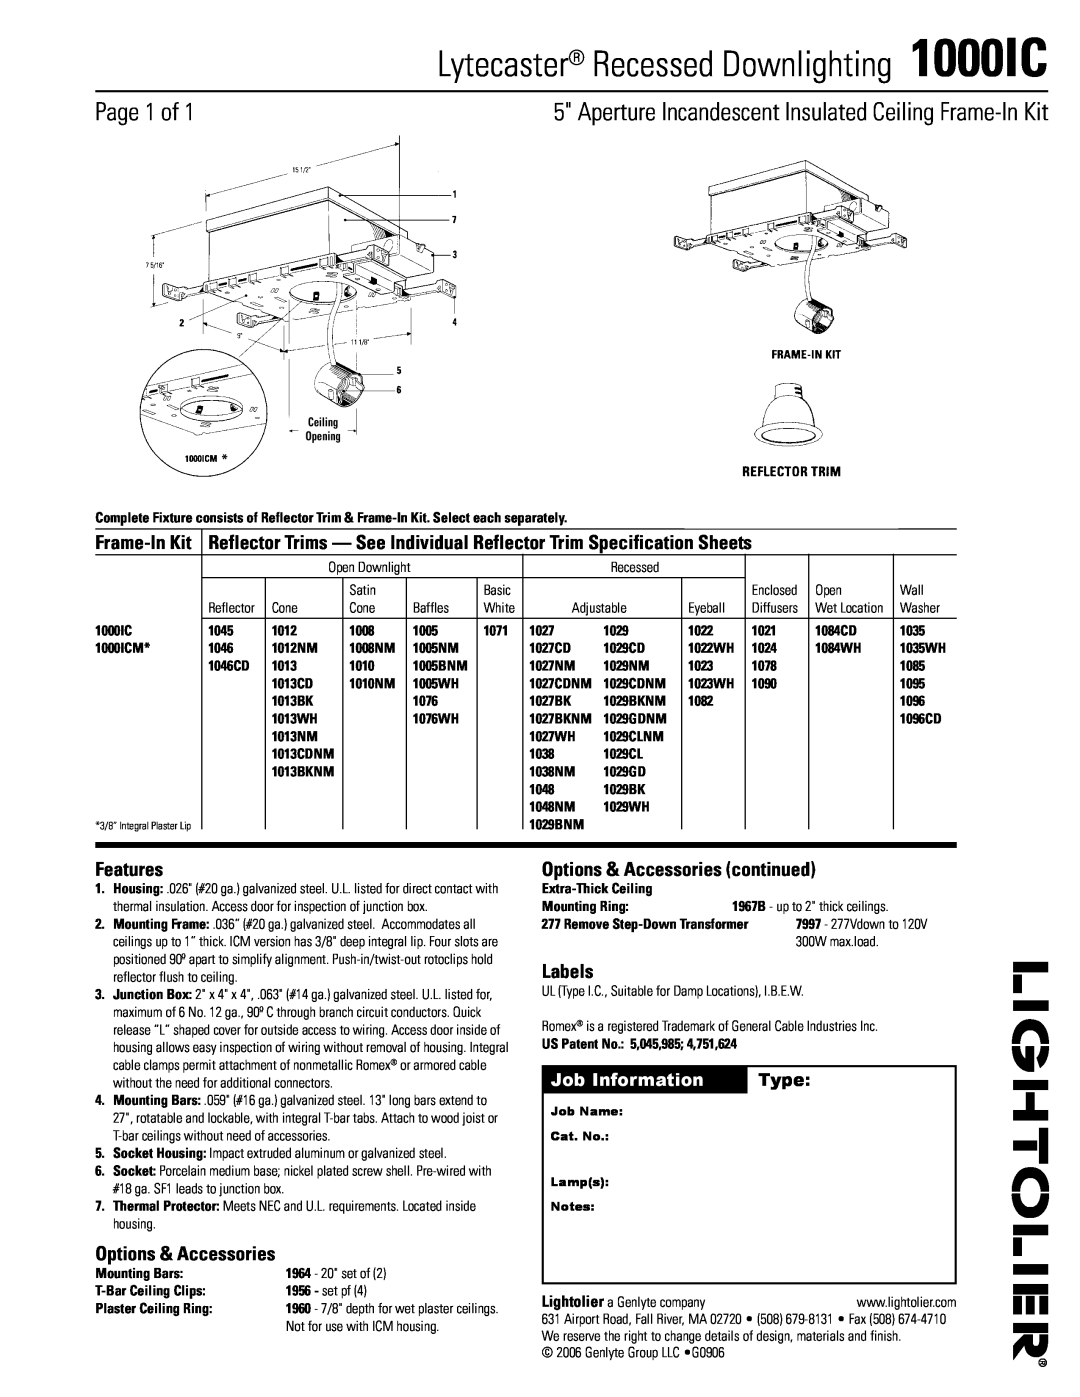 Lightolier specifications Lytecaster Recessed Downlighting 1000IC, Page 1 of, Features, Options & Accessories, Labels 